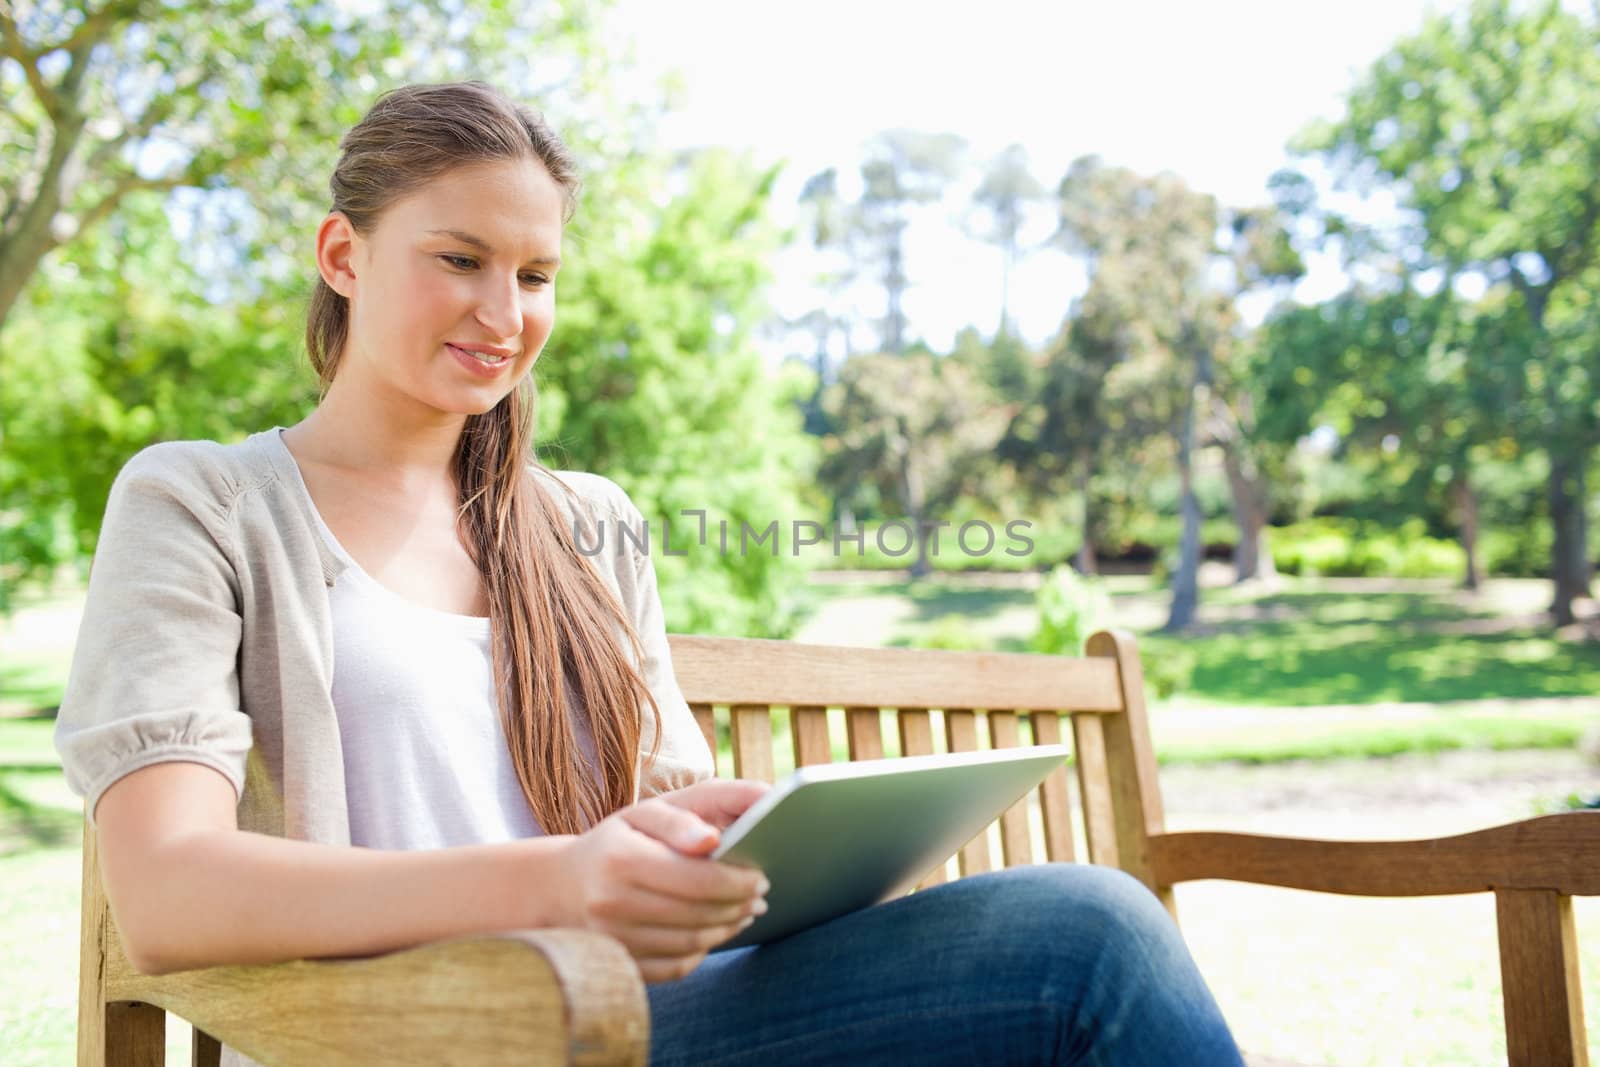 Smiling young woman using a tablet on a park bench